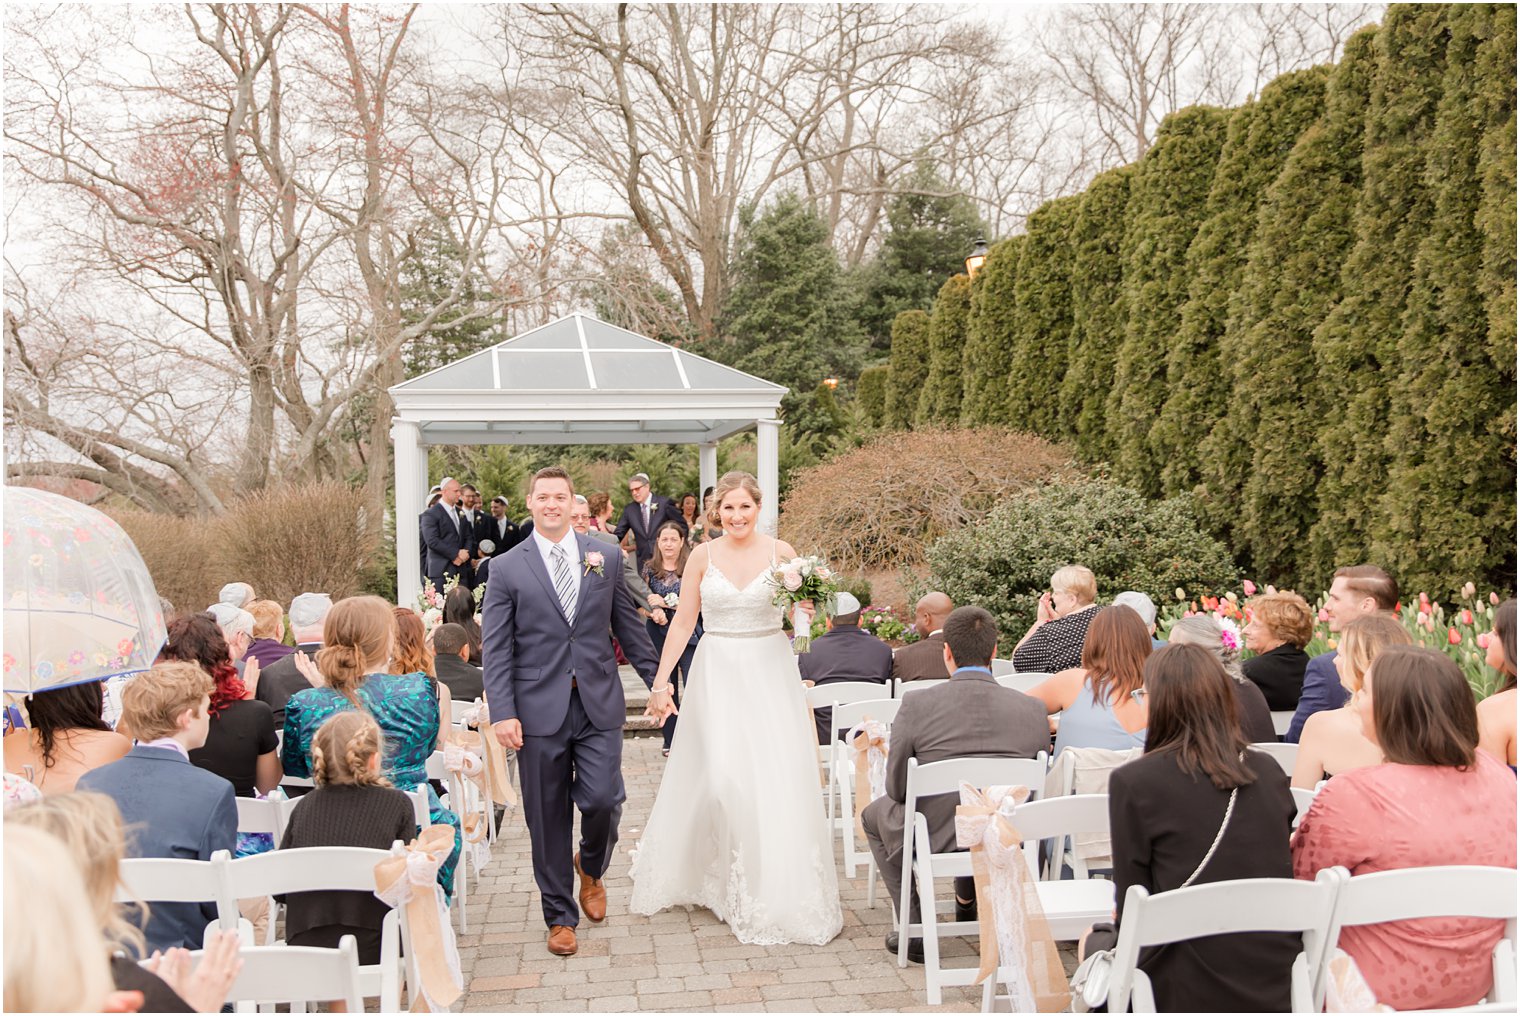 Wedding recessional at The Mill Lakeside Manor